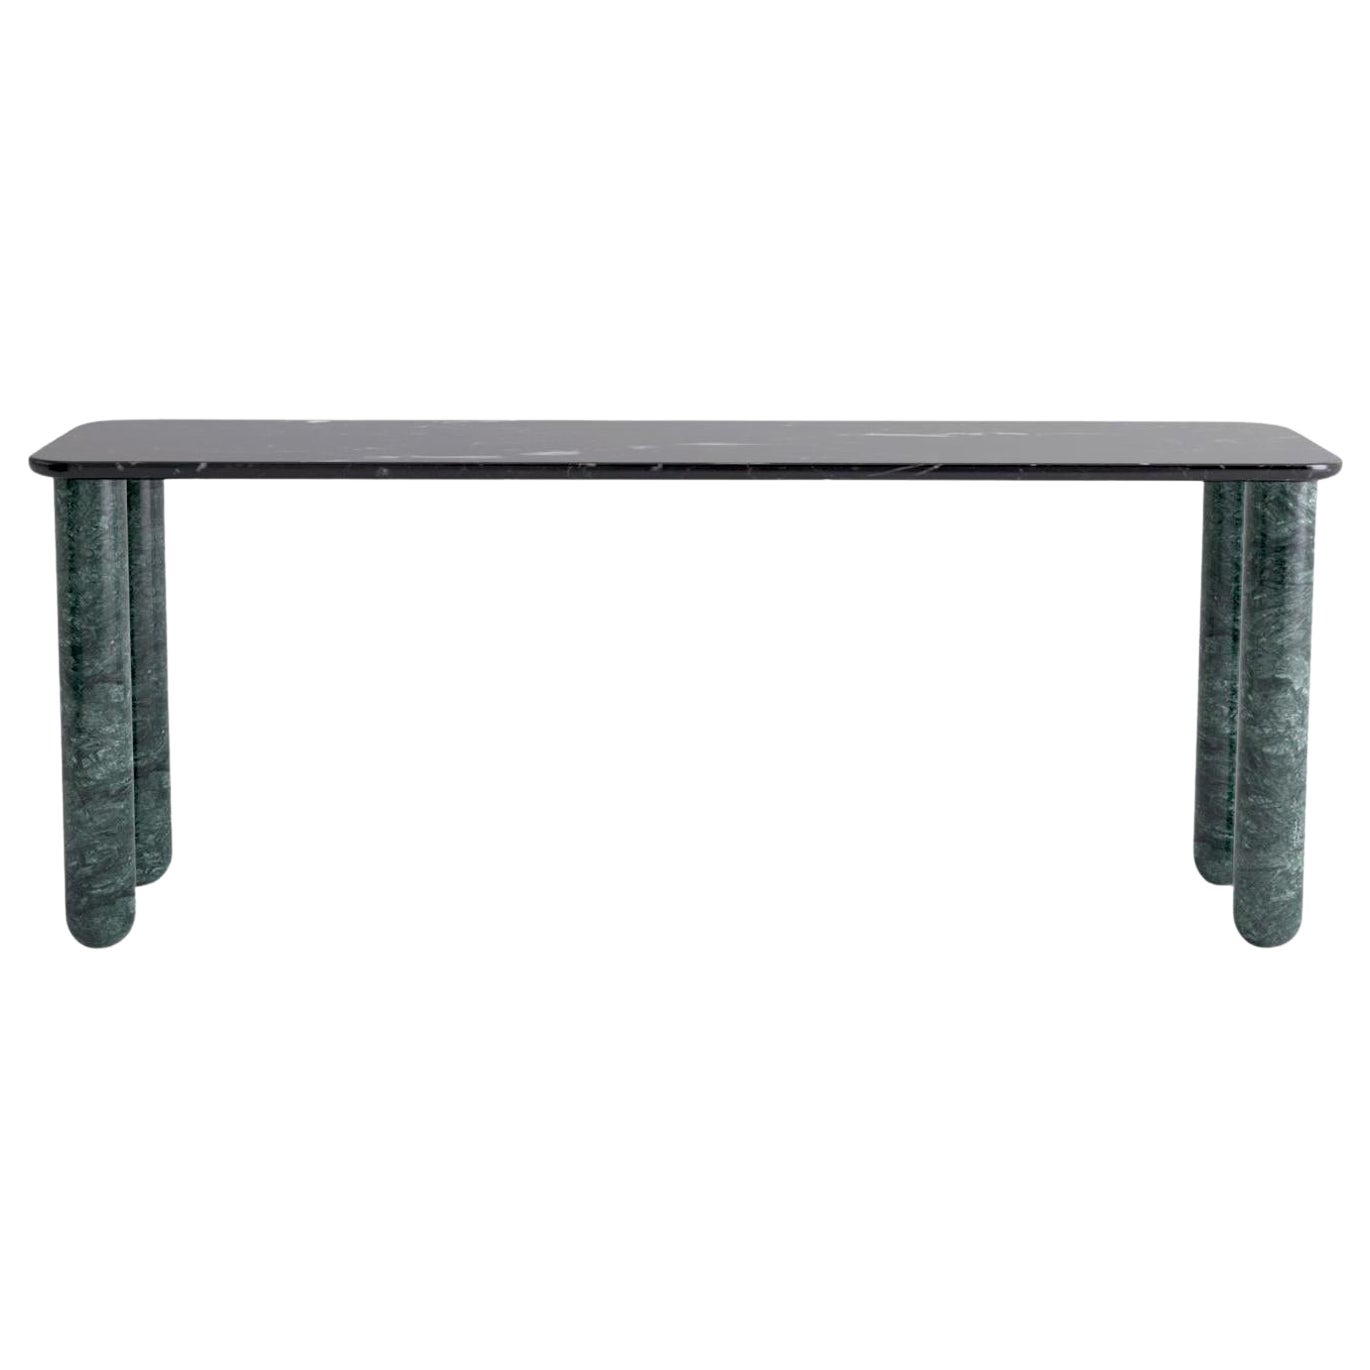 Large Black and Green Marble "Sunday" Dining Table, Jean-Baptiste Souletie